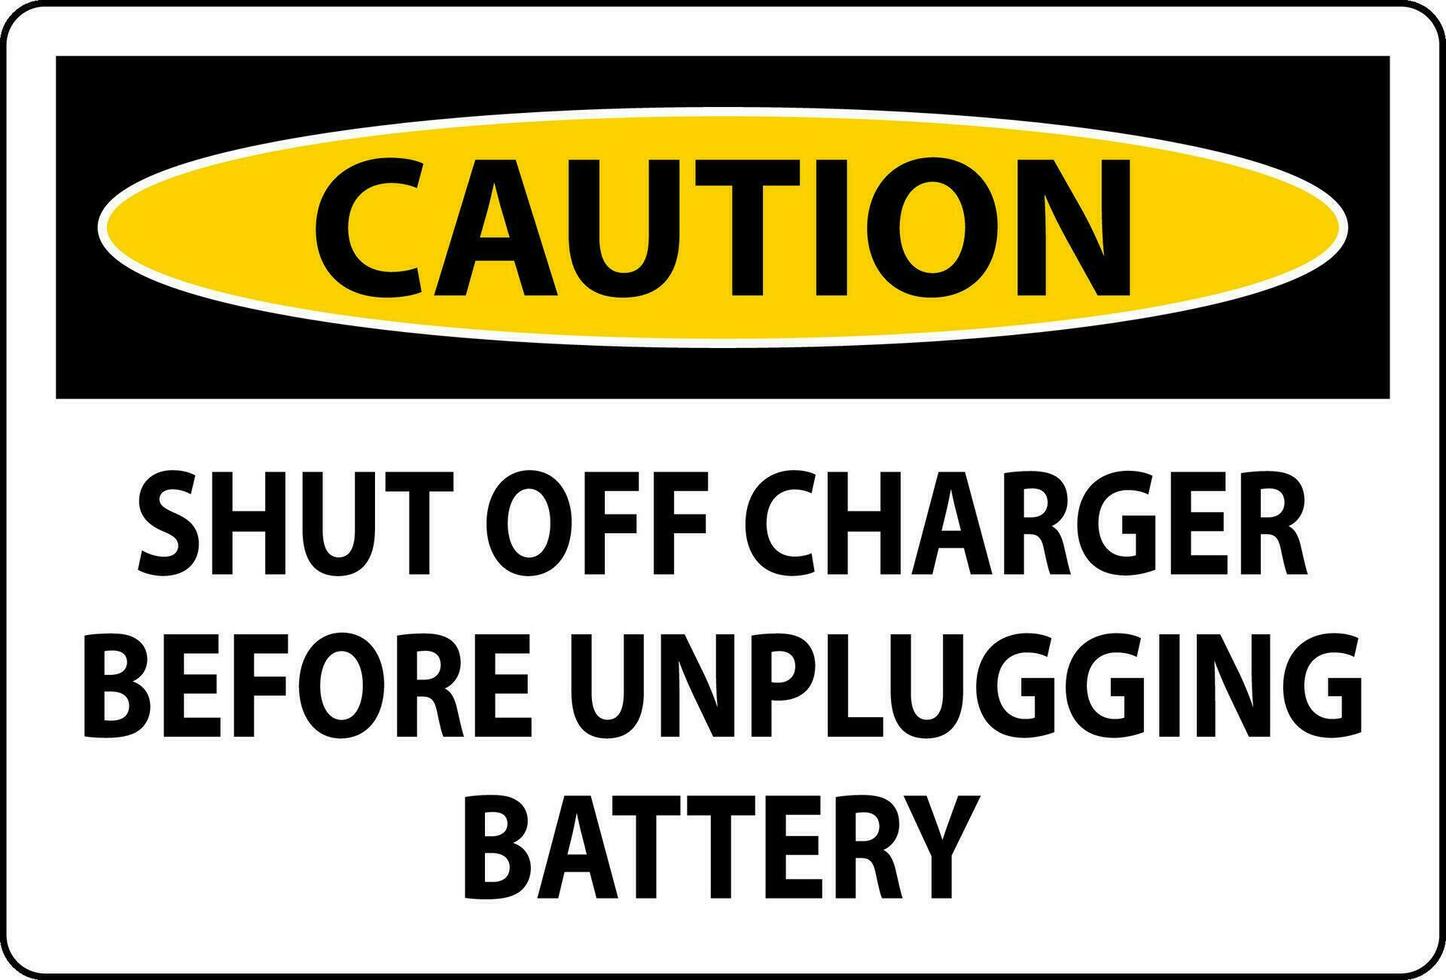 Caution Sign Shut Off Charger Before Unplugging Battery vector